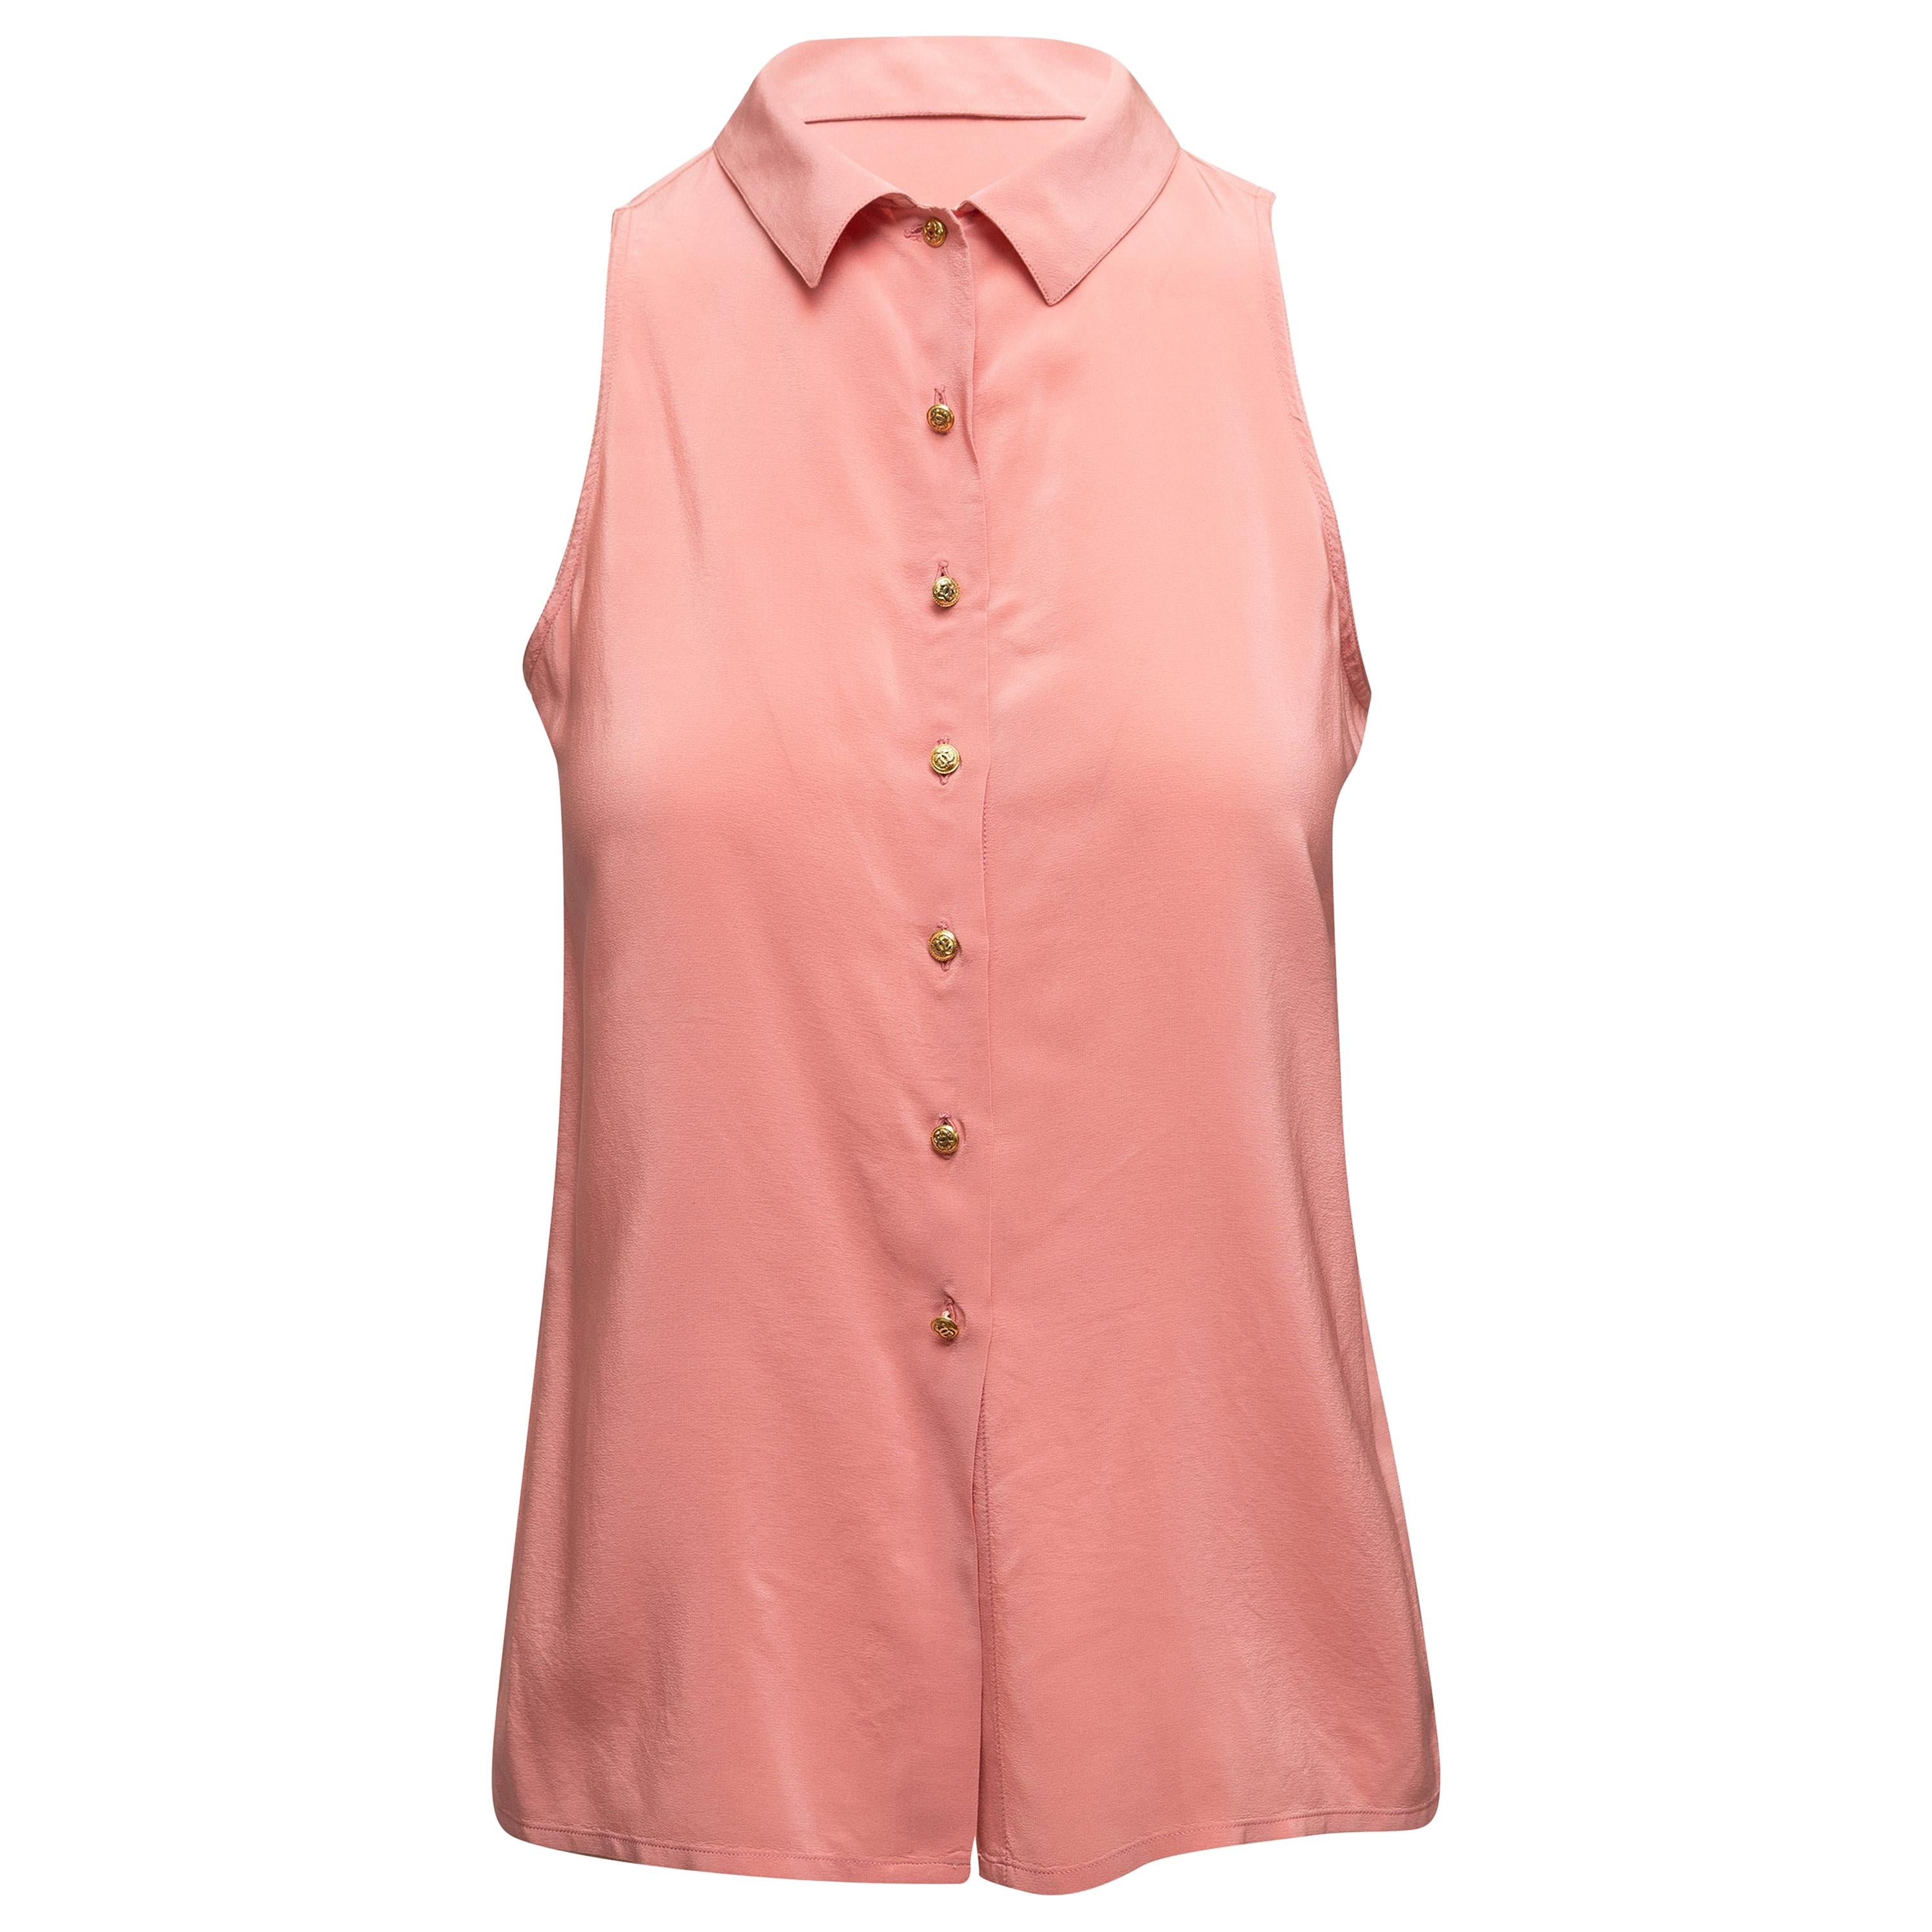 Chanel Pink Sleeveless Button-Up Top